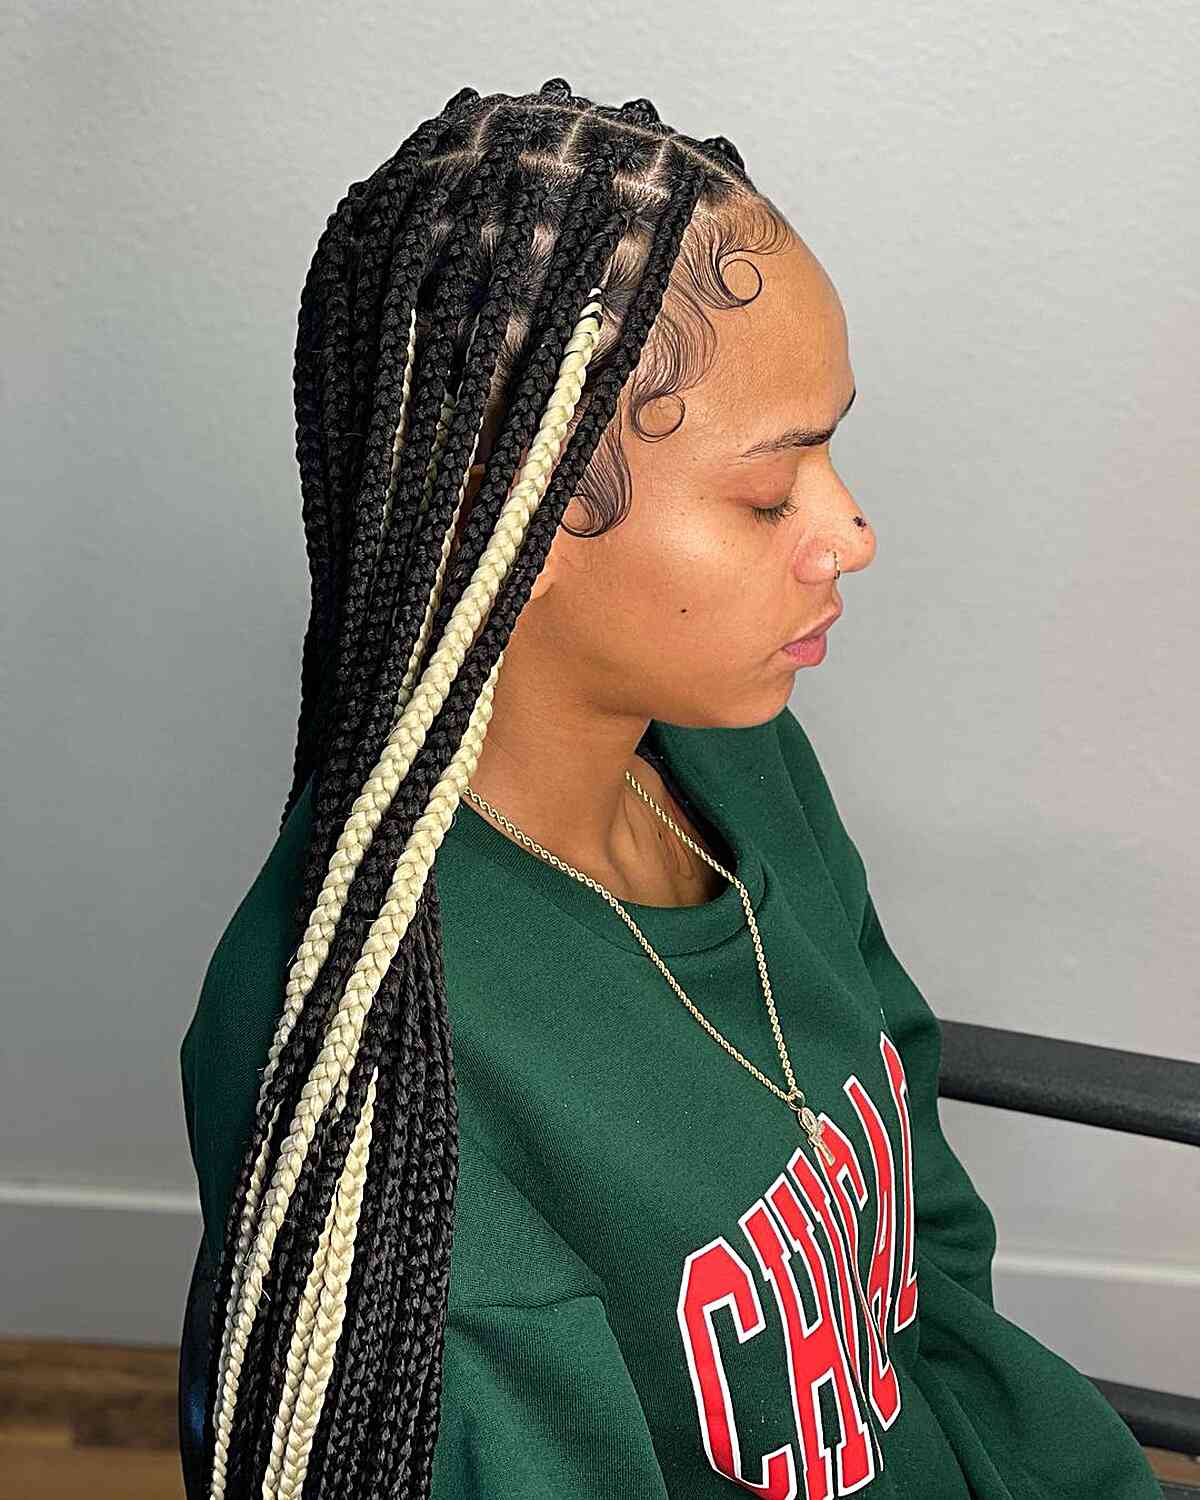 Long-Length Medium Knotless Black Braided Hair with Blonde Pieces